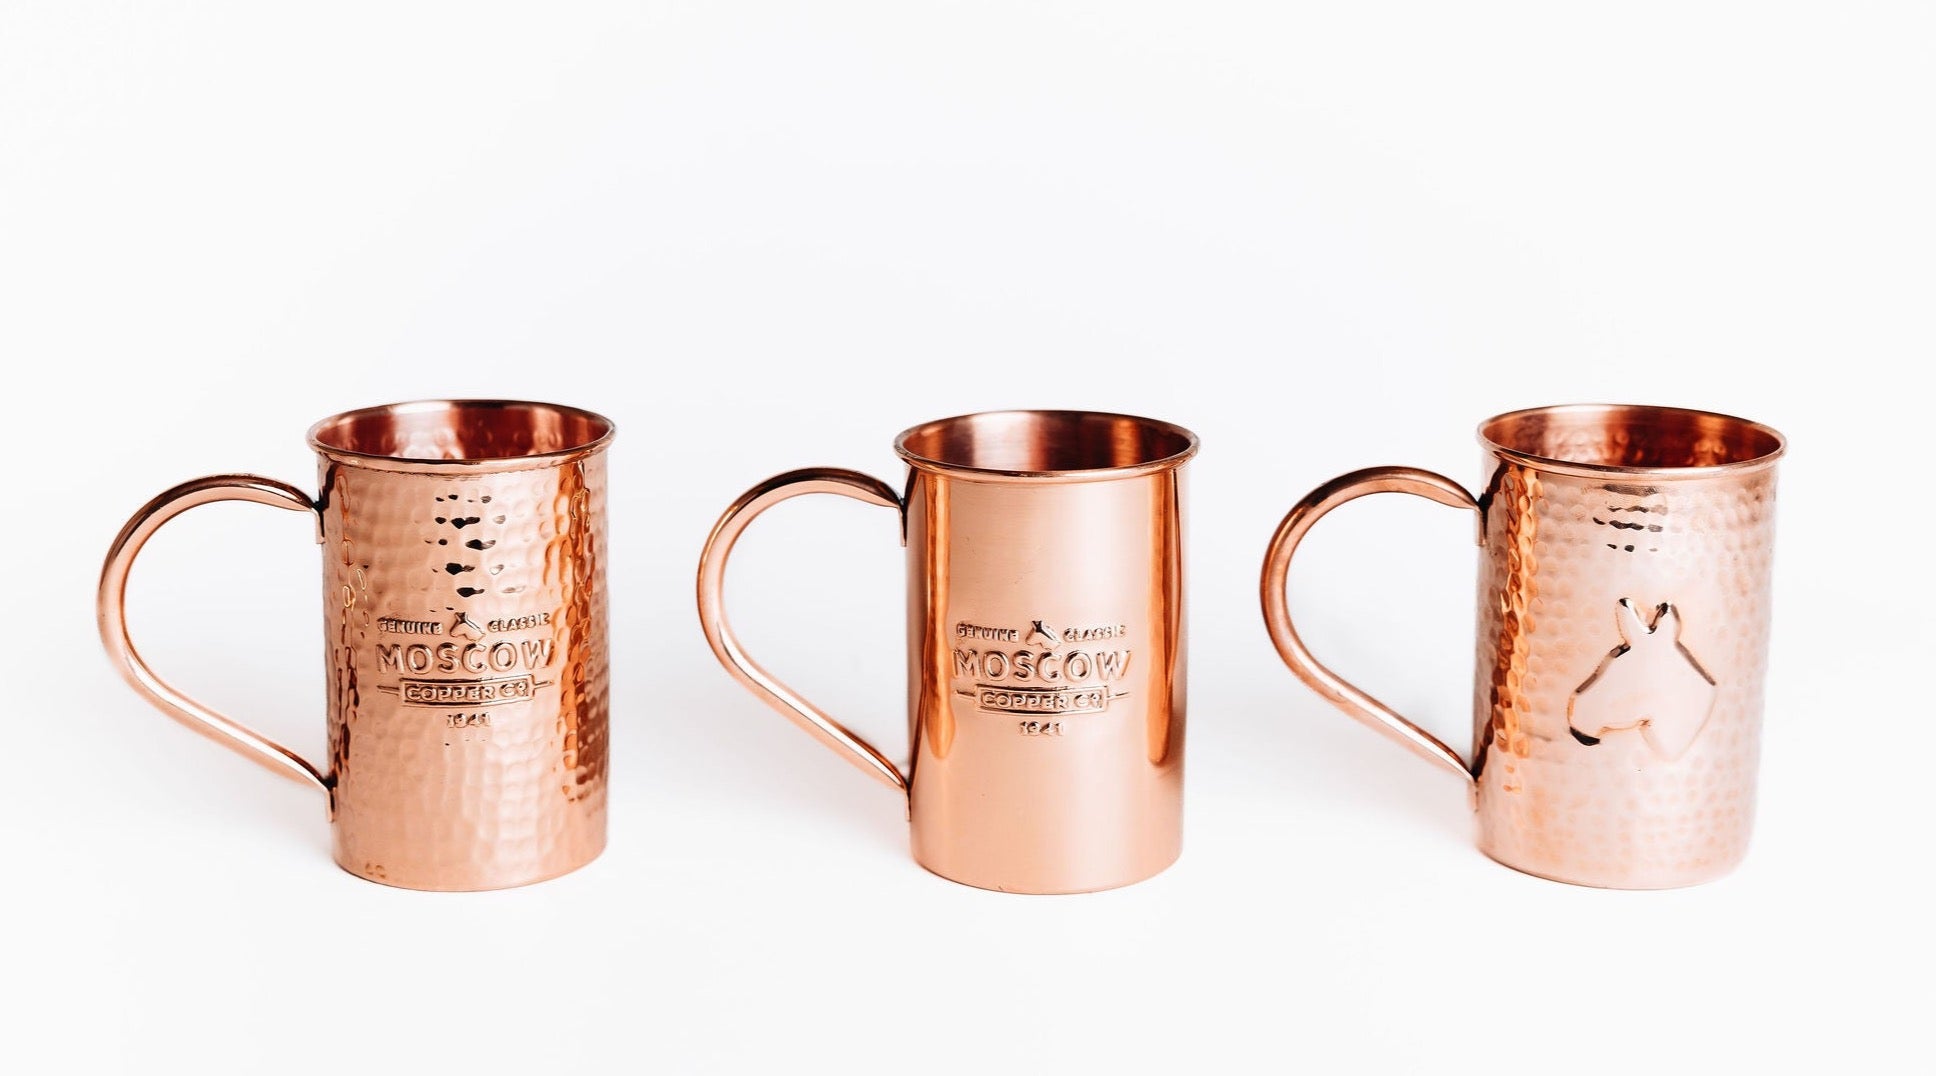 Moscow Map Engraved Copper Mug